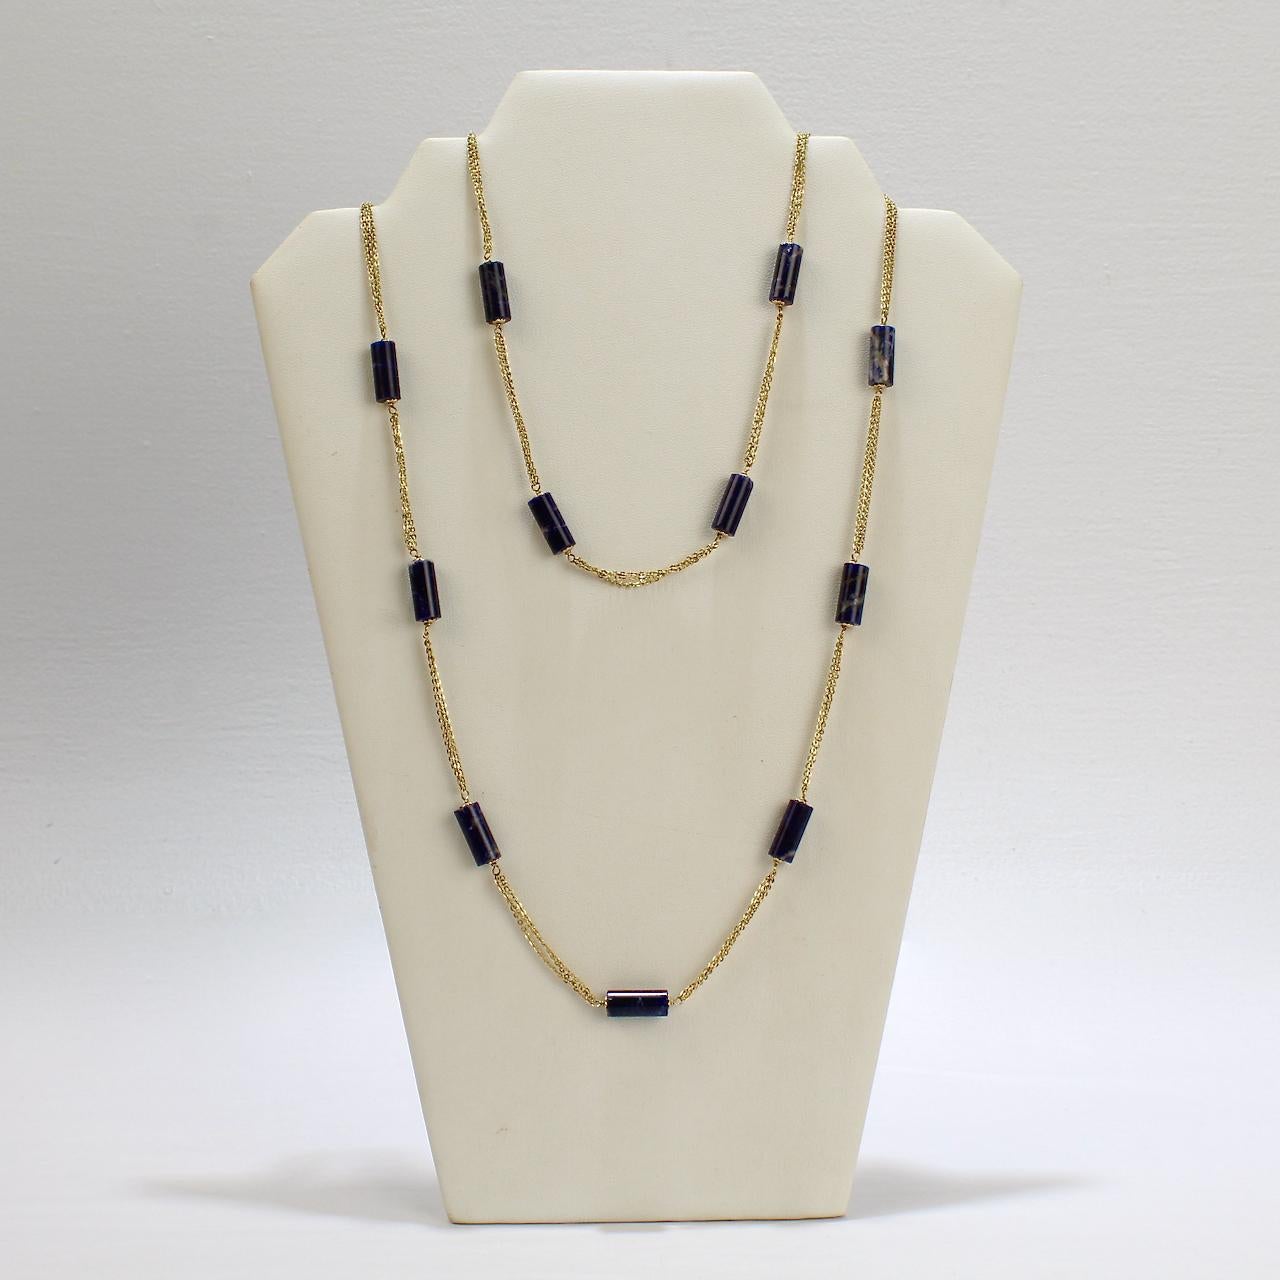 A fine Italian 18 karat gold and Lapis Lazuli beaded rope length necklace.

Made by Filippini Fratteli.

With cylinder shaped lapis beads capped with small gold florets that are interspersed between sections of flat oval cable chain